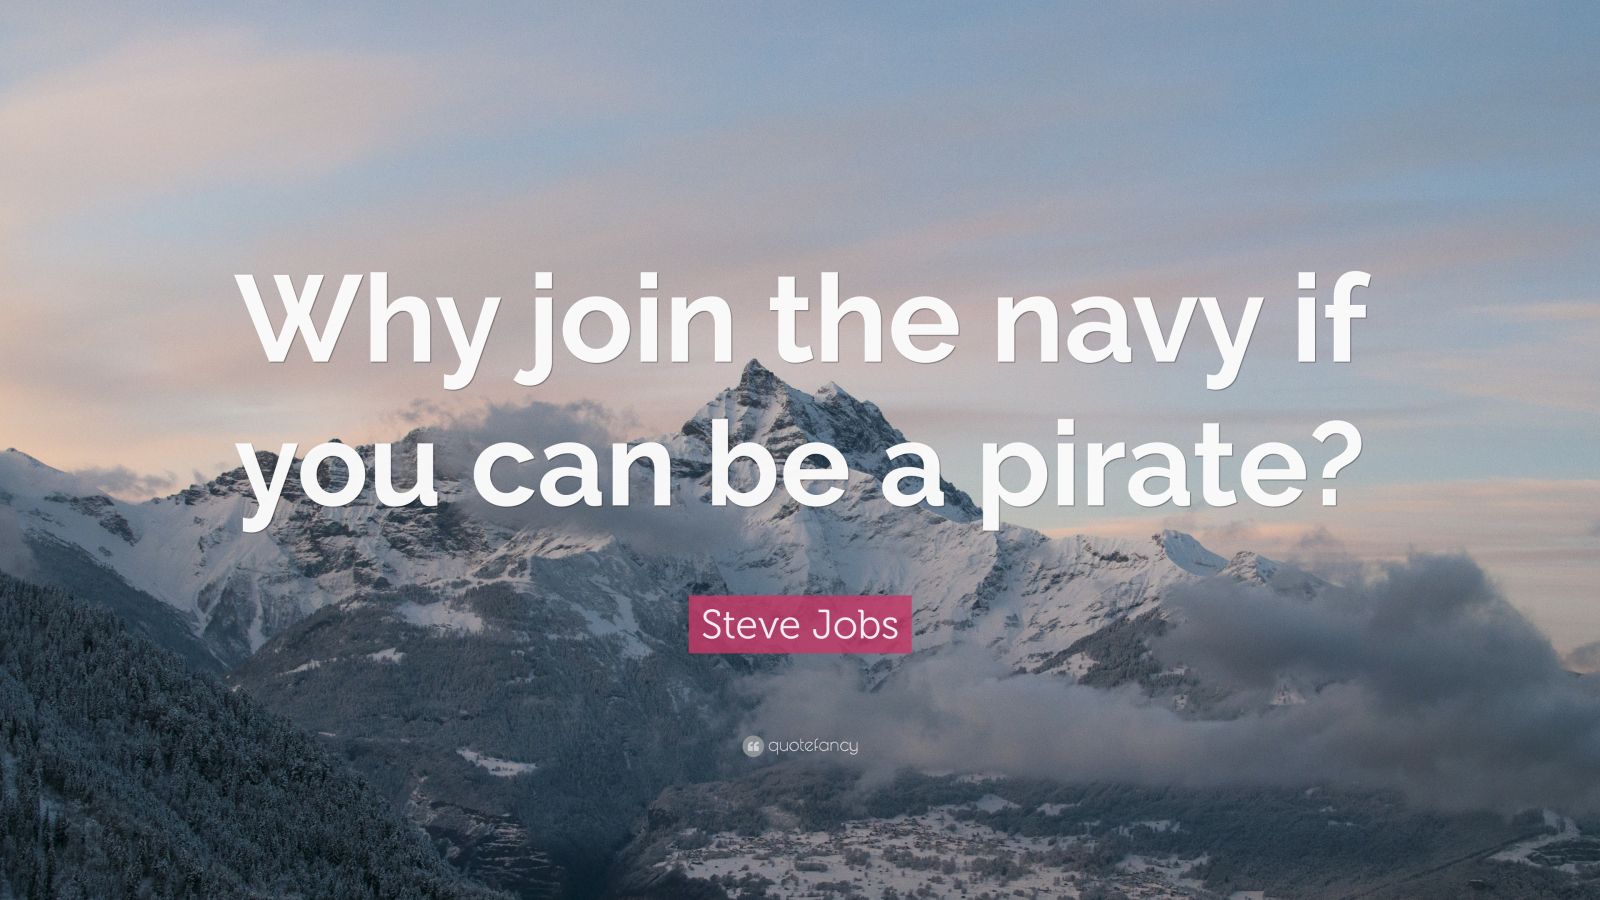 Steve Jobs Quote: “Why join the navy if you can be a pirate?” (21 ...